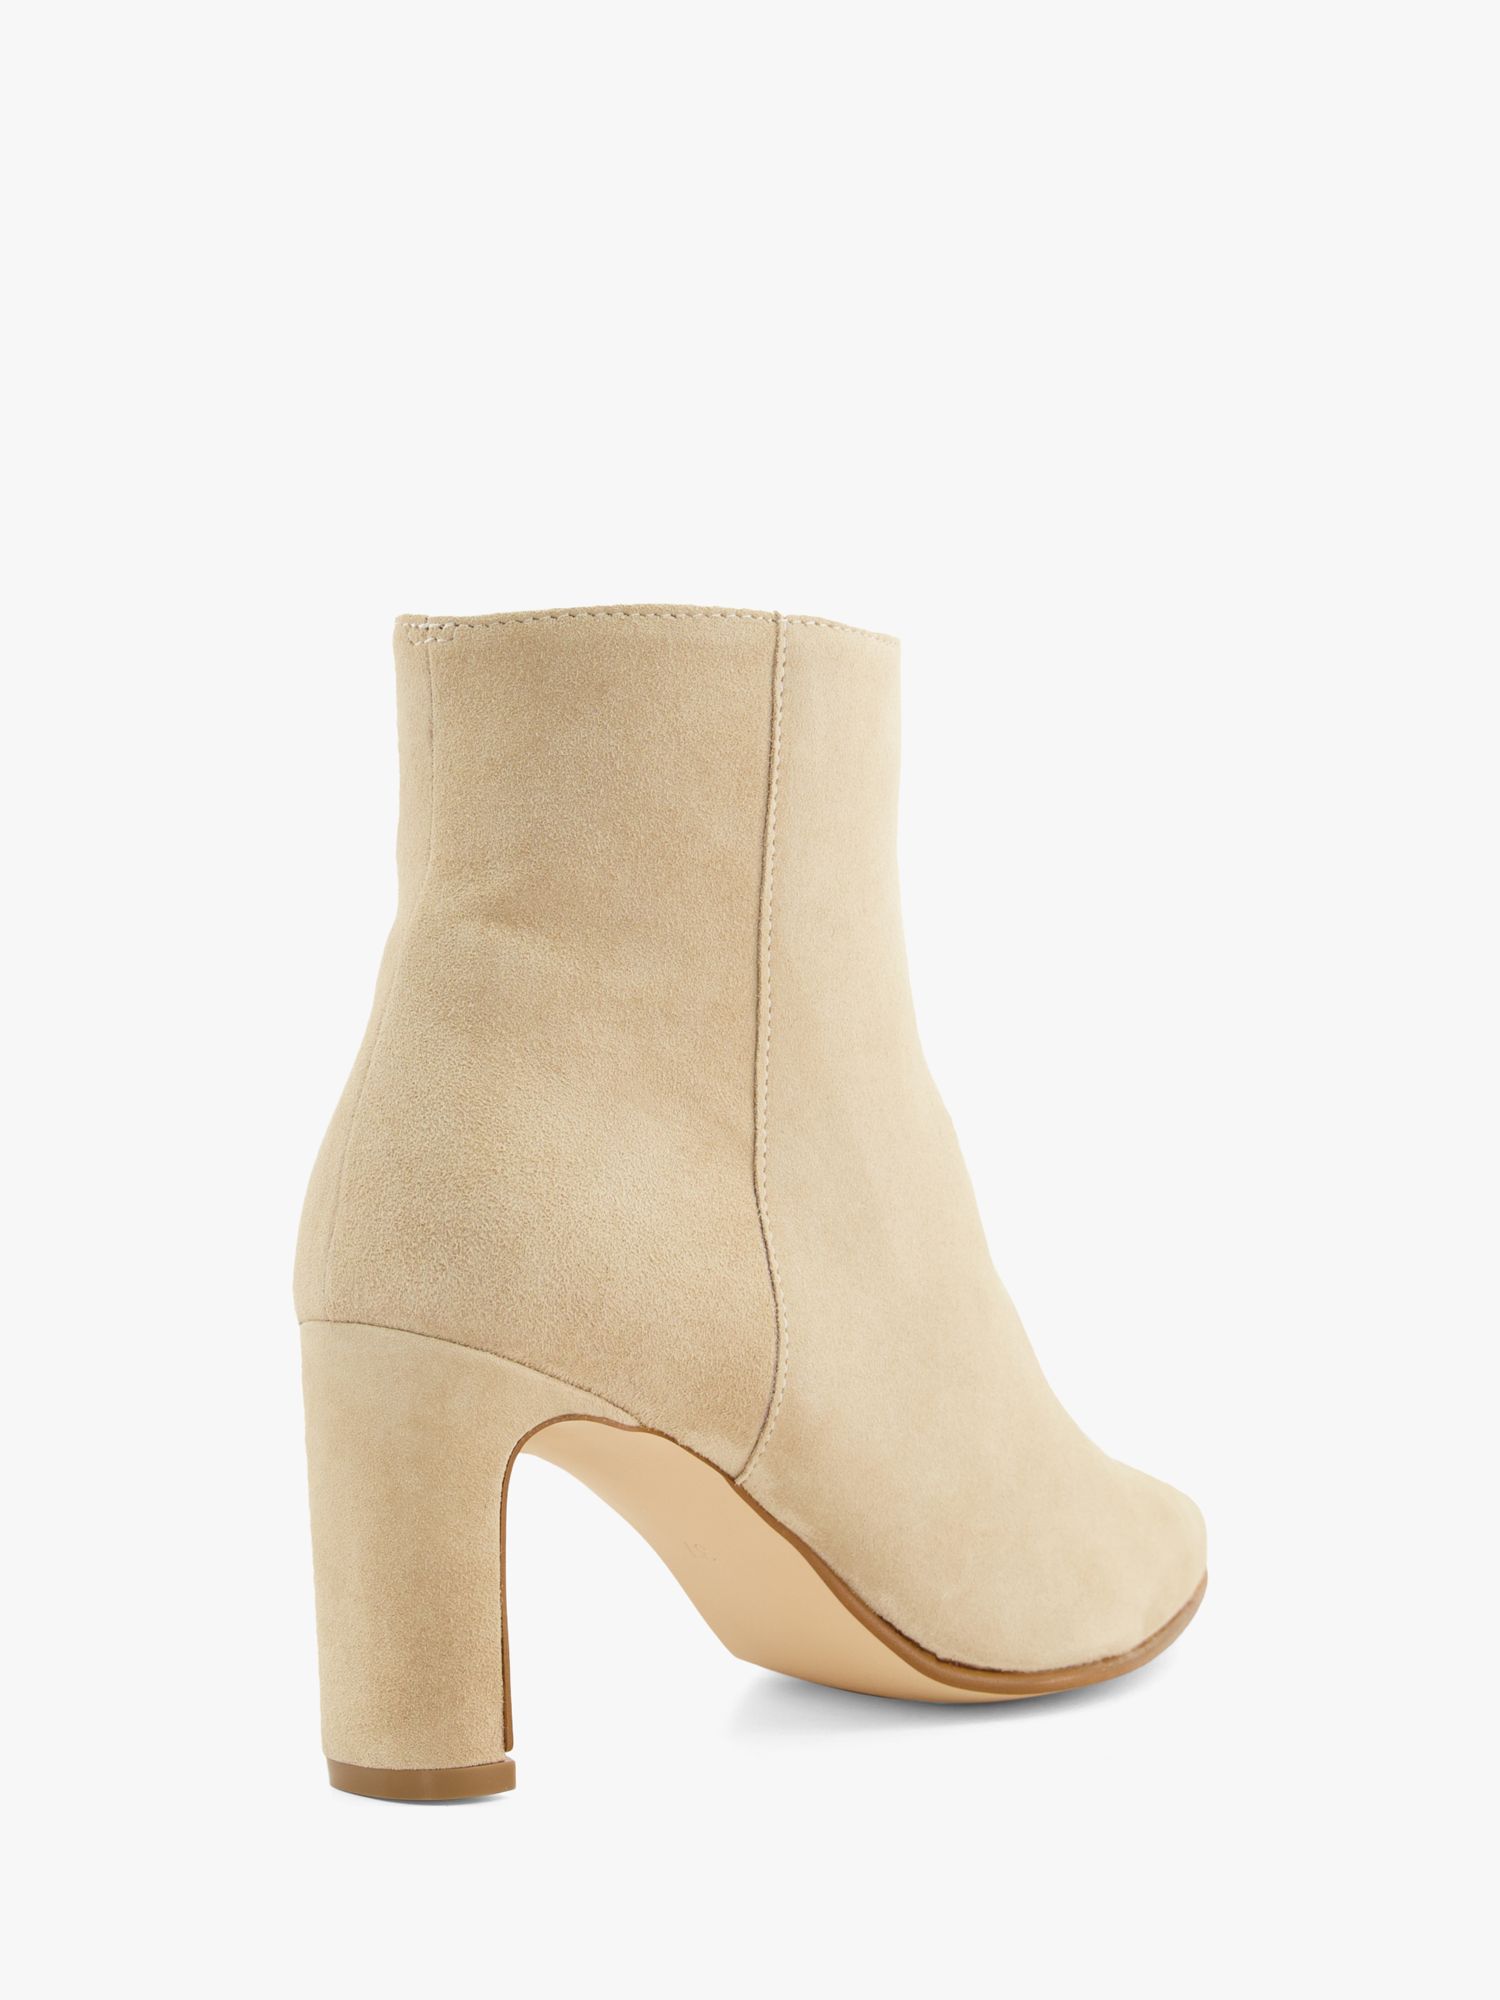 Dune Suede Heel Pointed Ankle Boots, Sand at Lewis & Partners